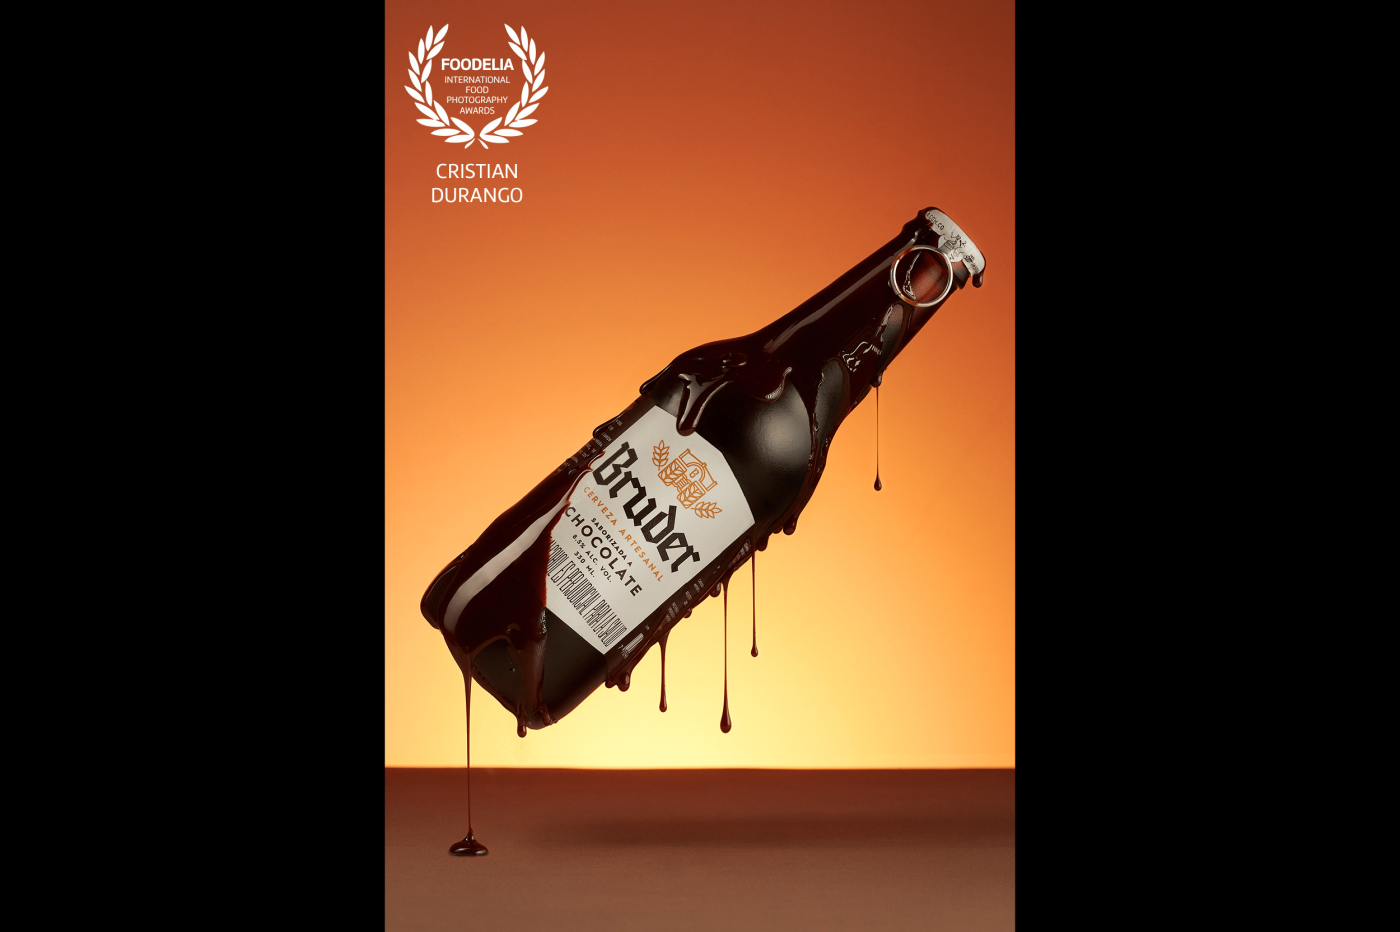 The best way to enhance the flavor of a delicious beer is to show its nature, what it is really made of and what it makes you feel. I took this photograph with 3 lights, 2 on the sides and one in the background. Obviously, I did photoshop just to put together several shots of the chocolate.